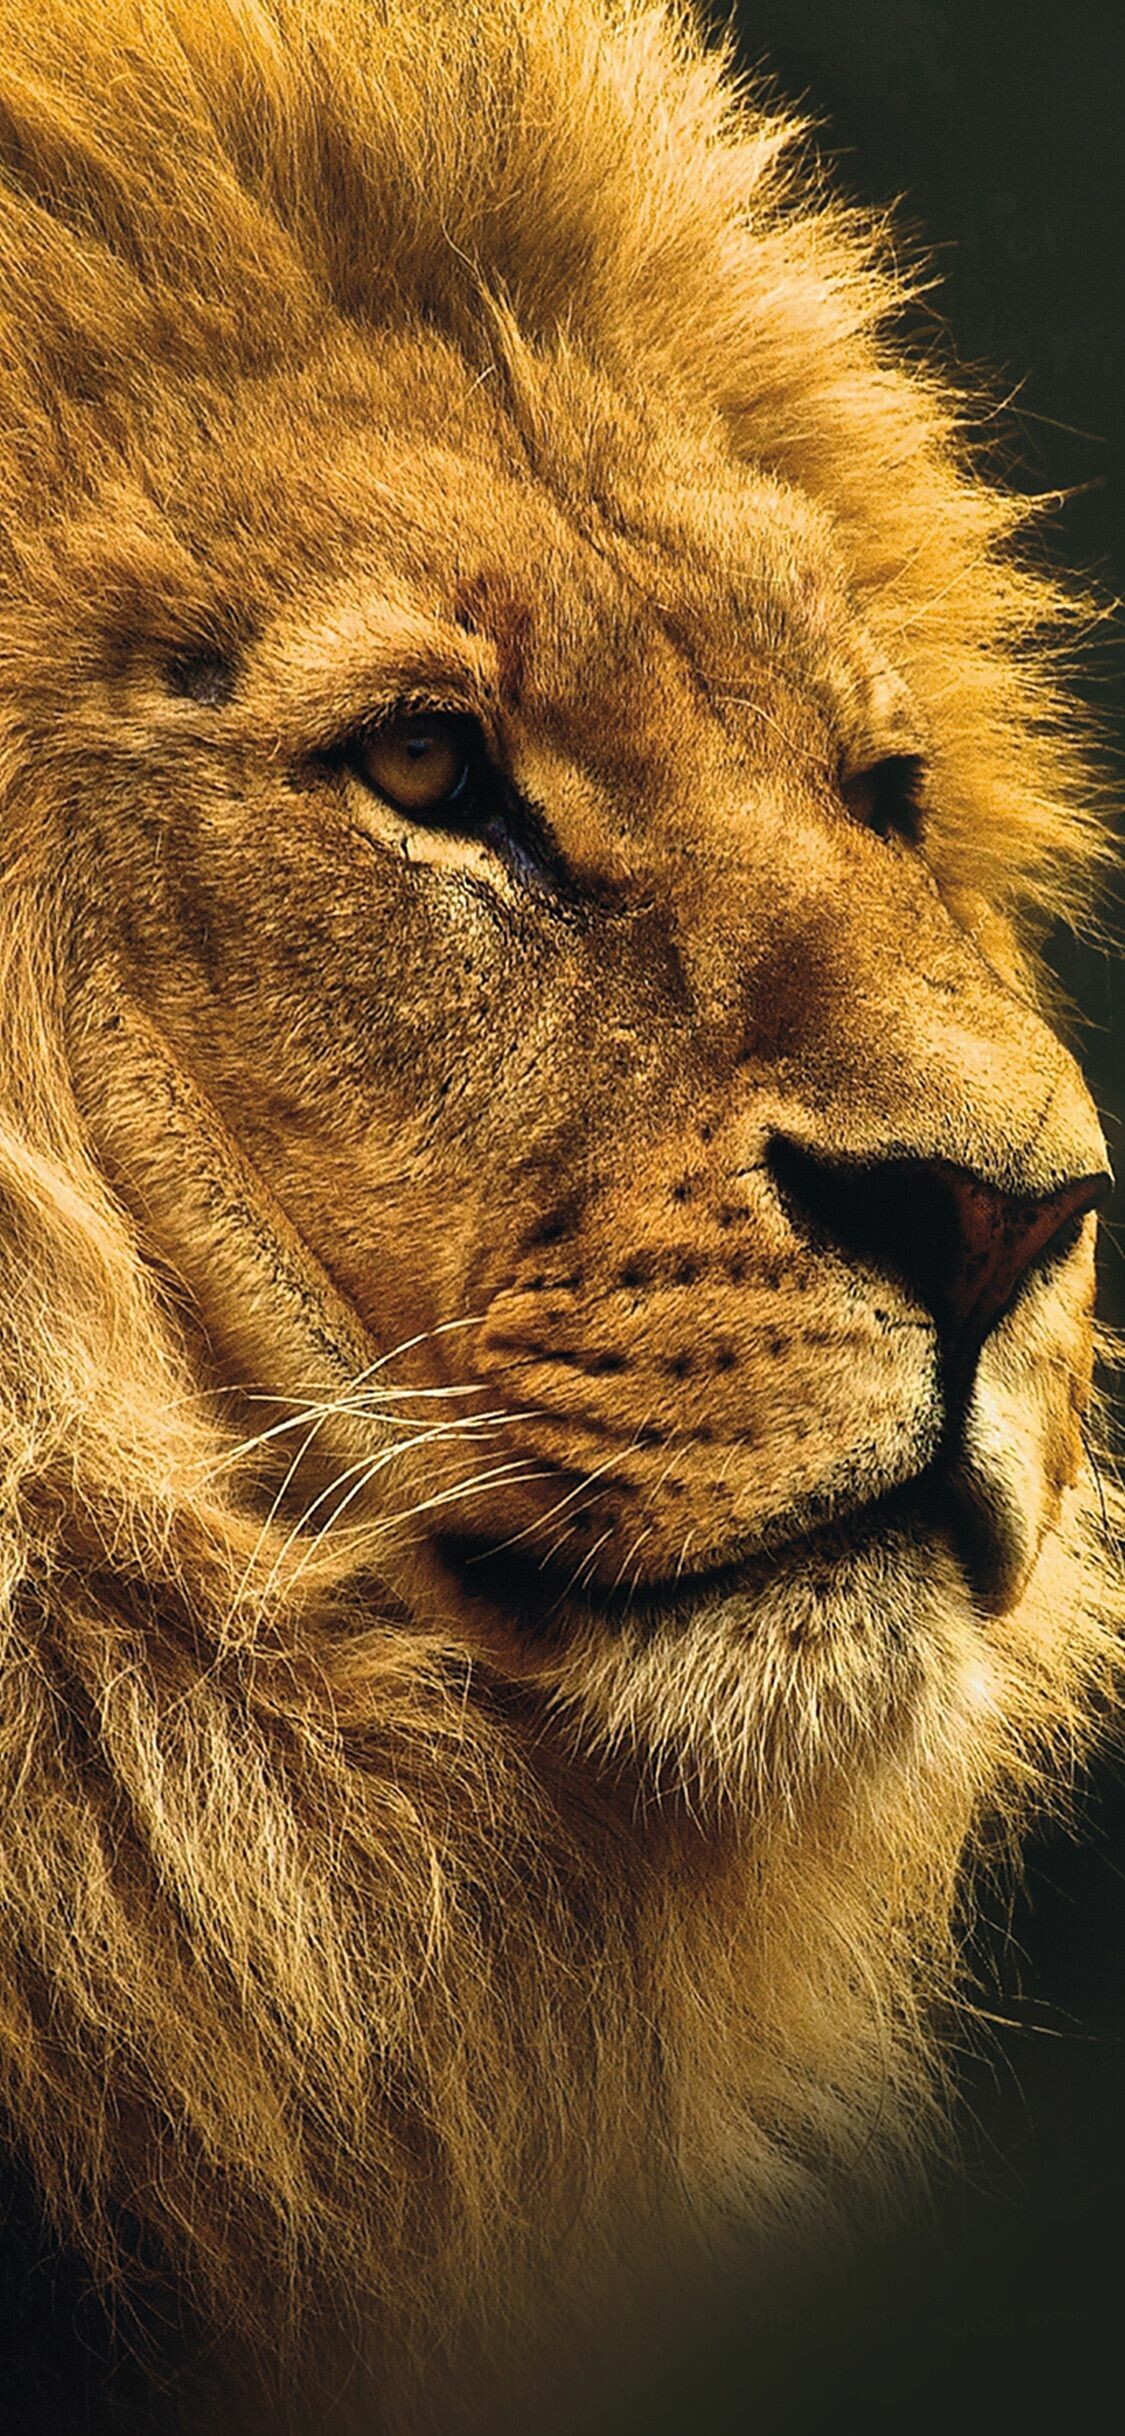 Lion: One of the best-known wild animals since the earliest times. 1130x2440 HD Wallpaper.